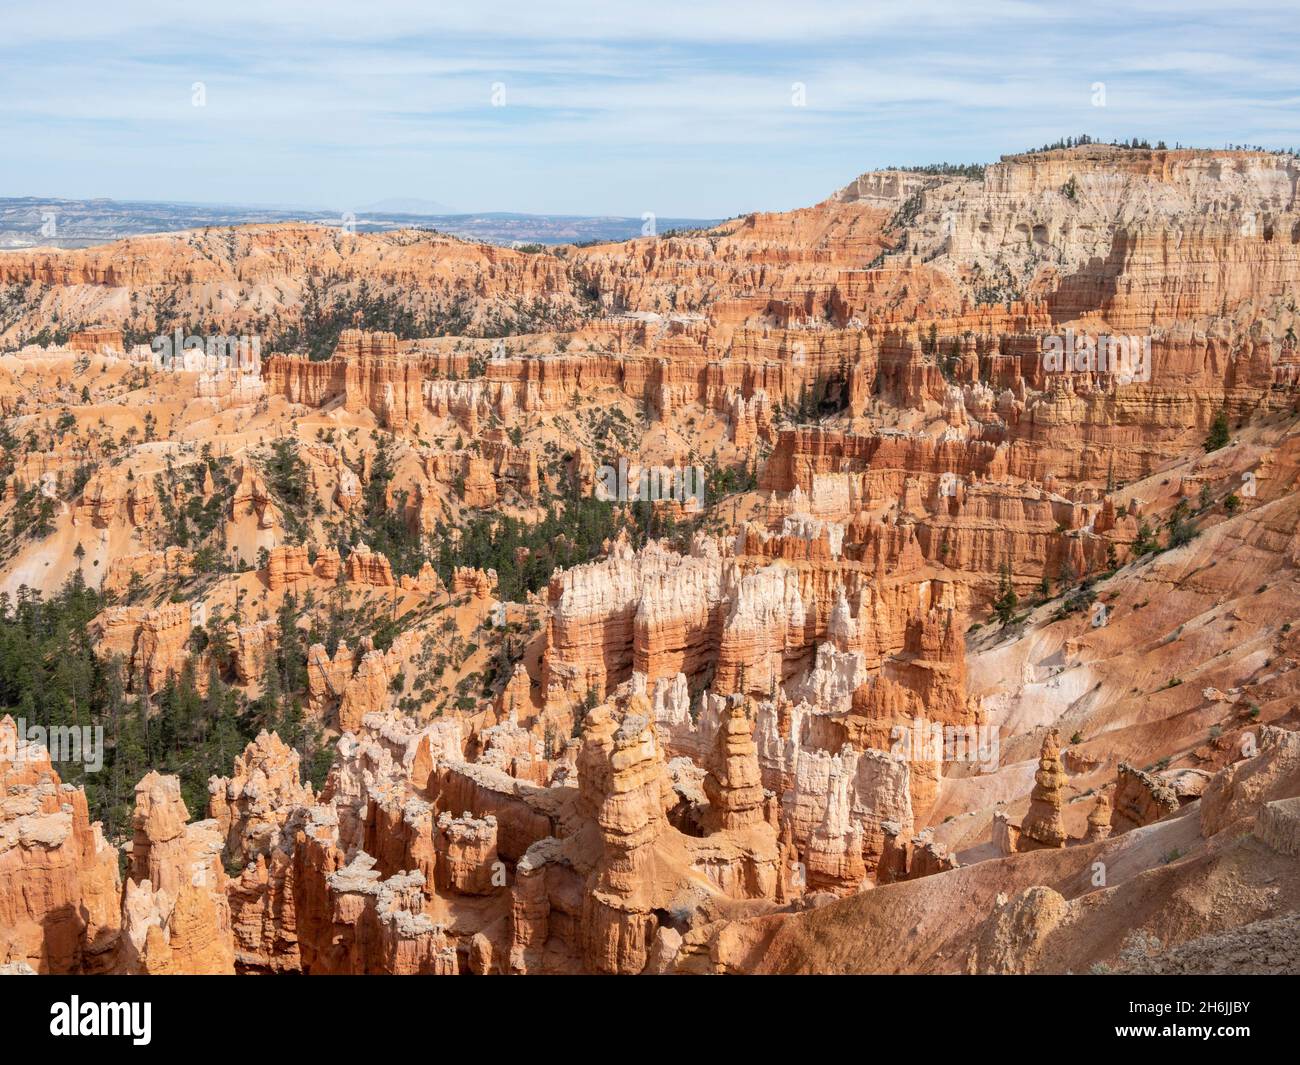 A view of the Bryce amphitheater from the rim at Bryce Canyon National Park, Utah, United States of America, North America Stock Photo